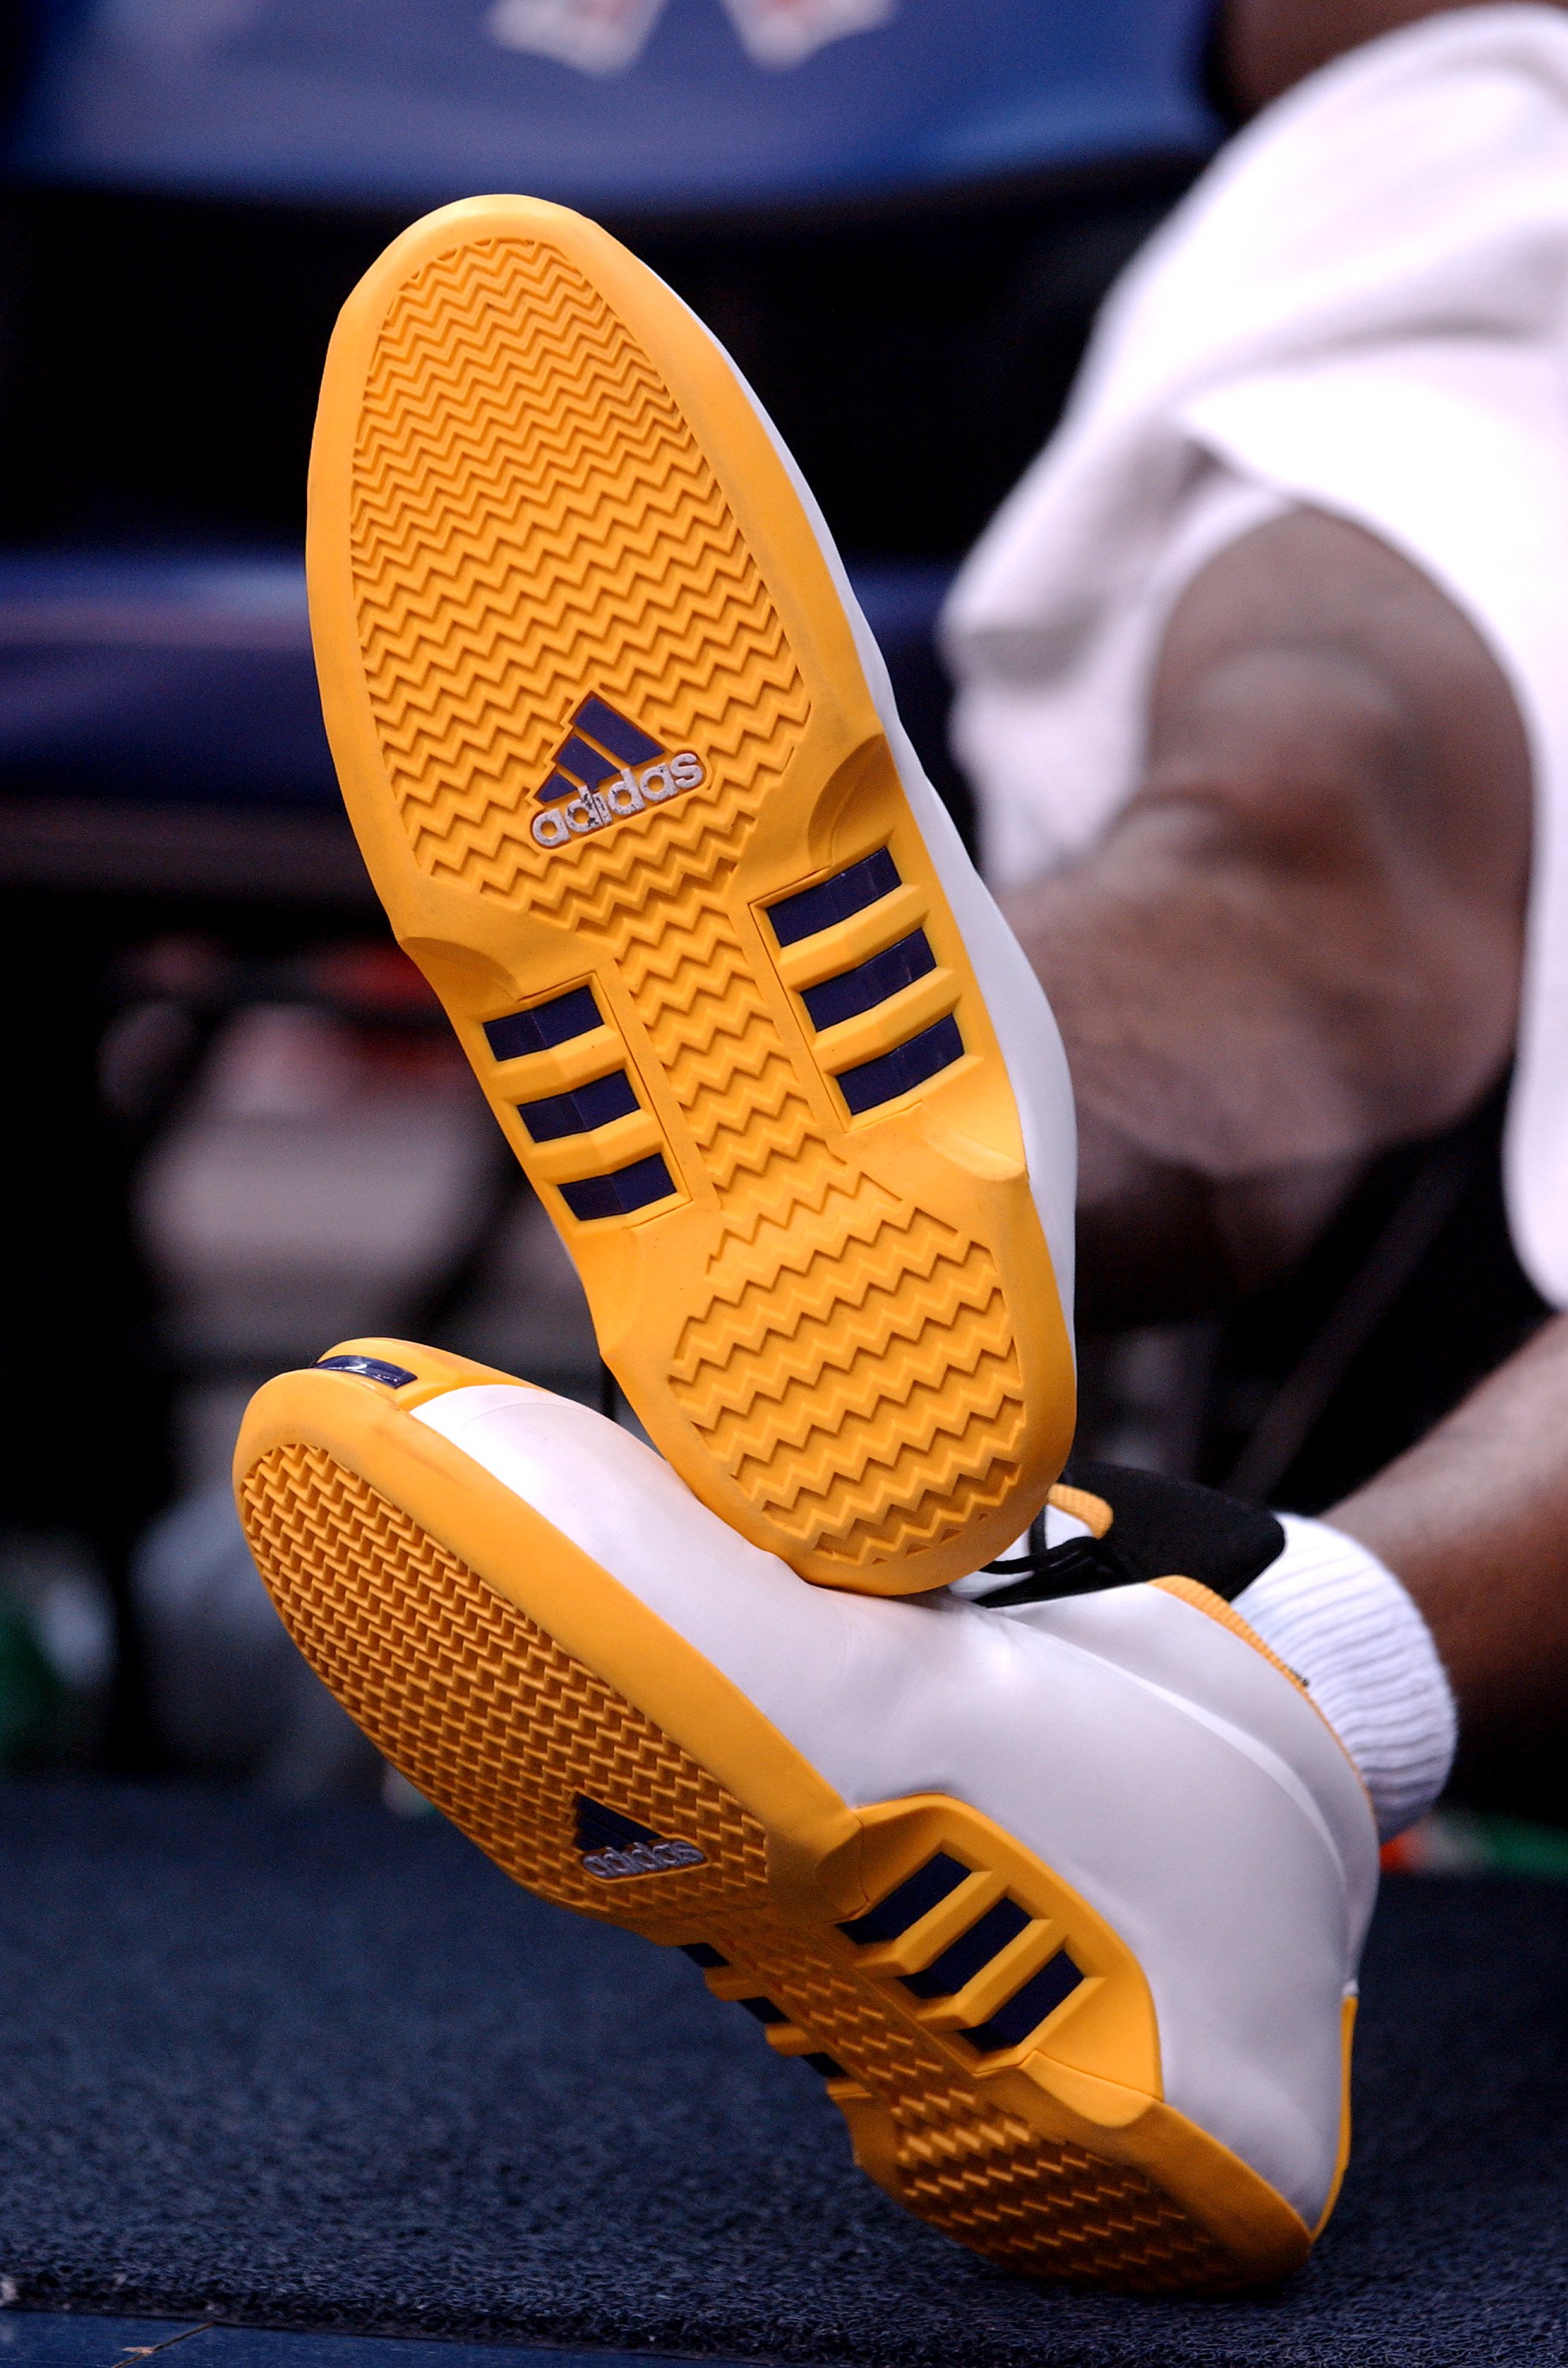 Kobe Bryant's legs and shoes are phootgraphed during a Lakers game at the MCI Center in Washington DC on April 2, 2002